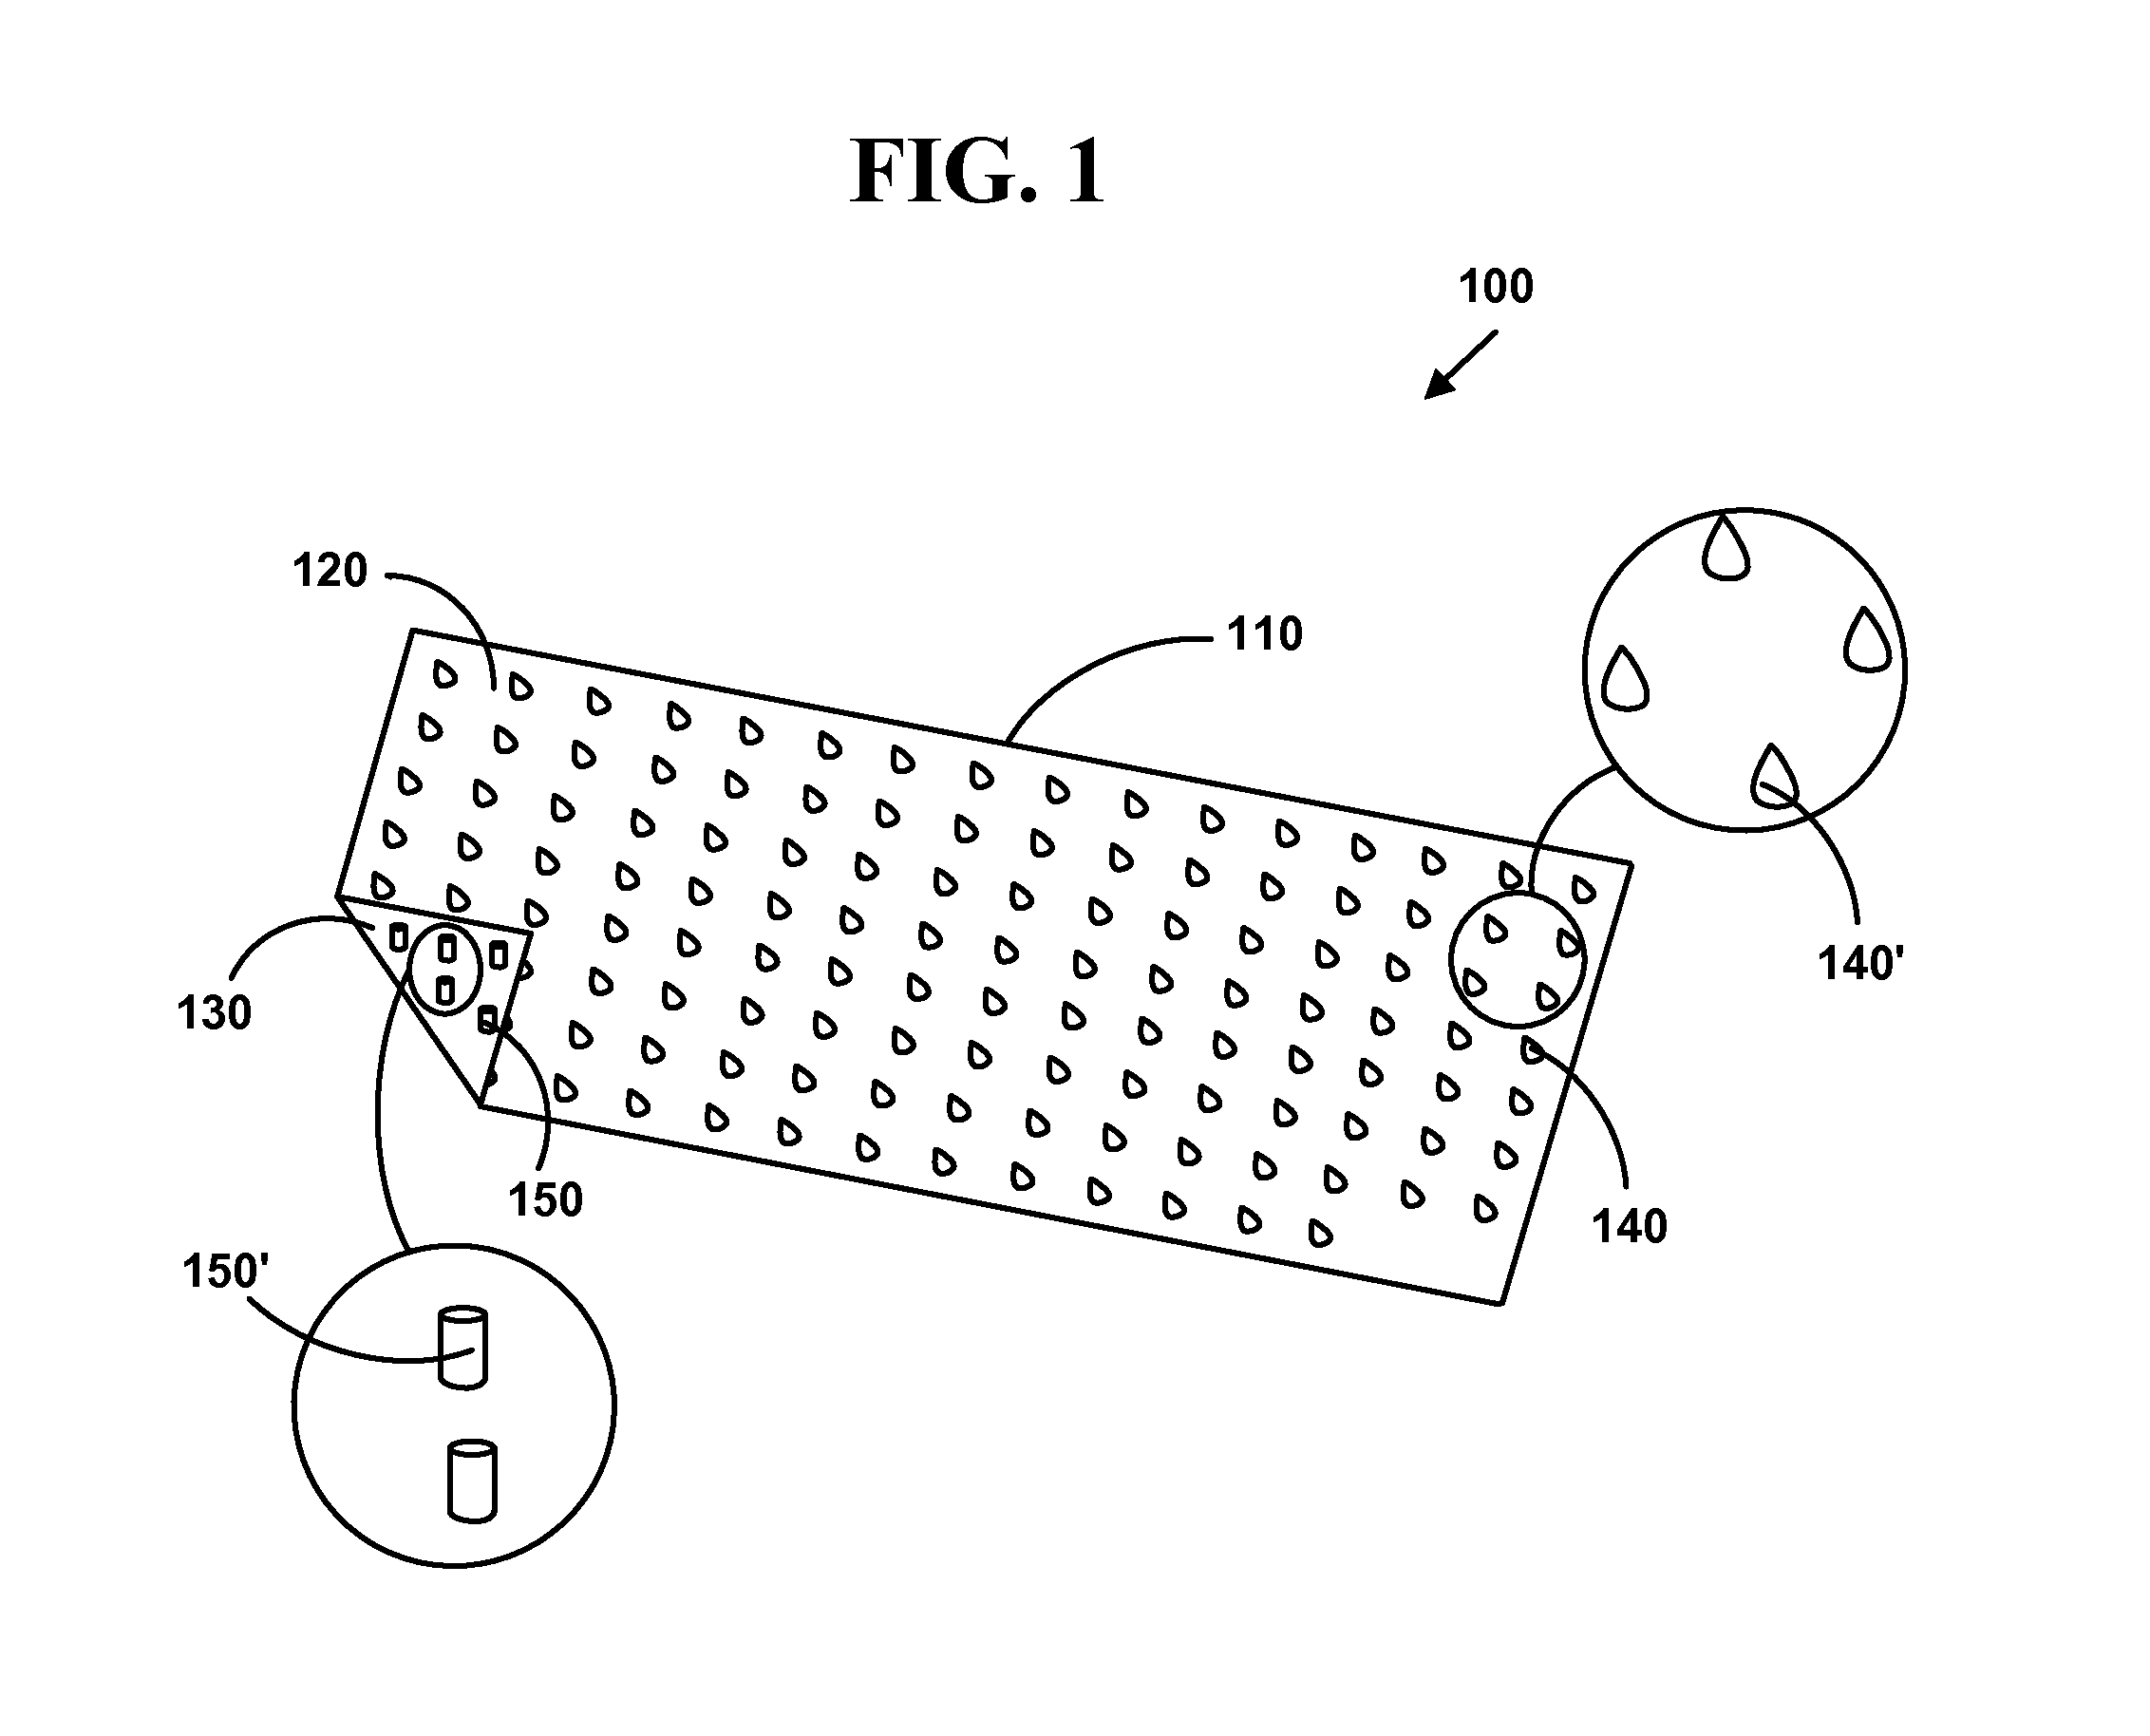 Acupressure non-slip device, method, and apparatus for use with exercise